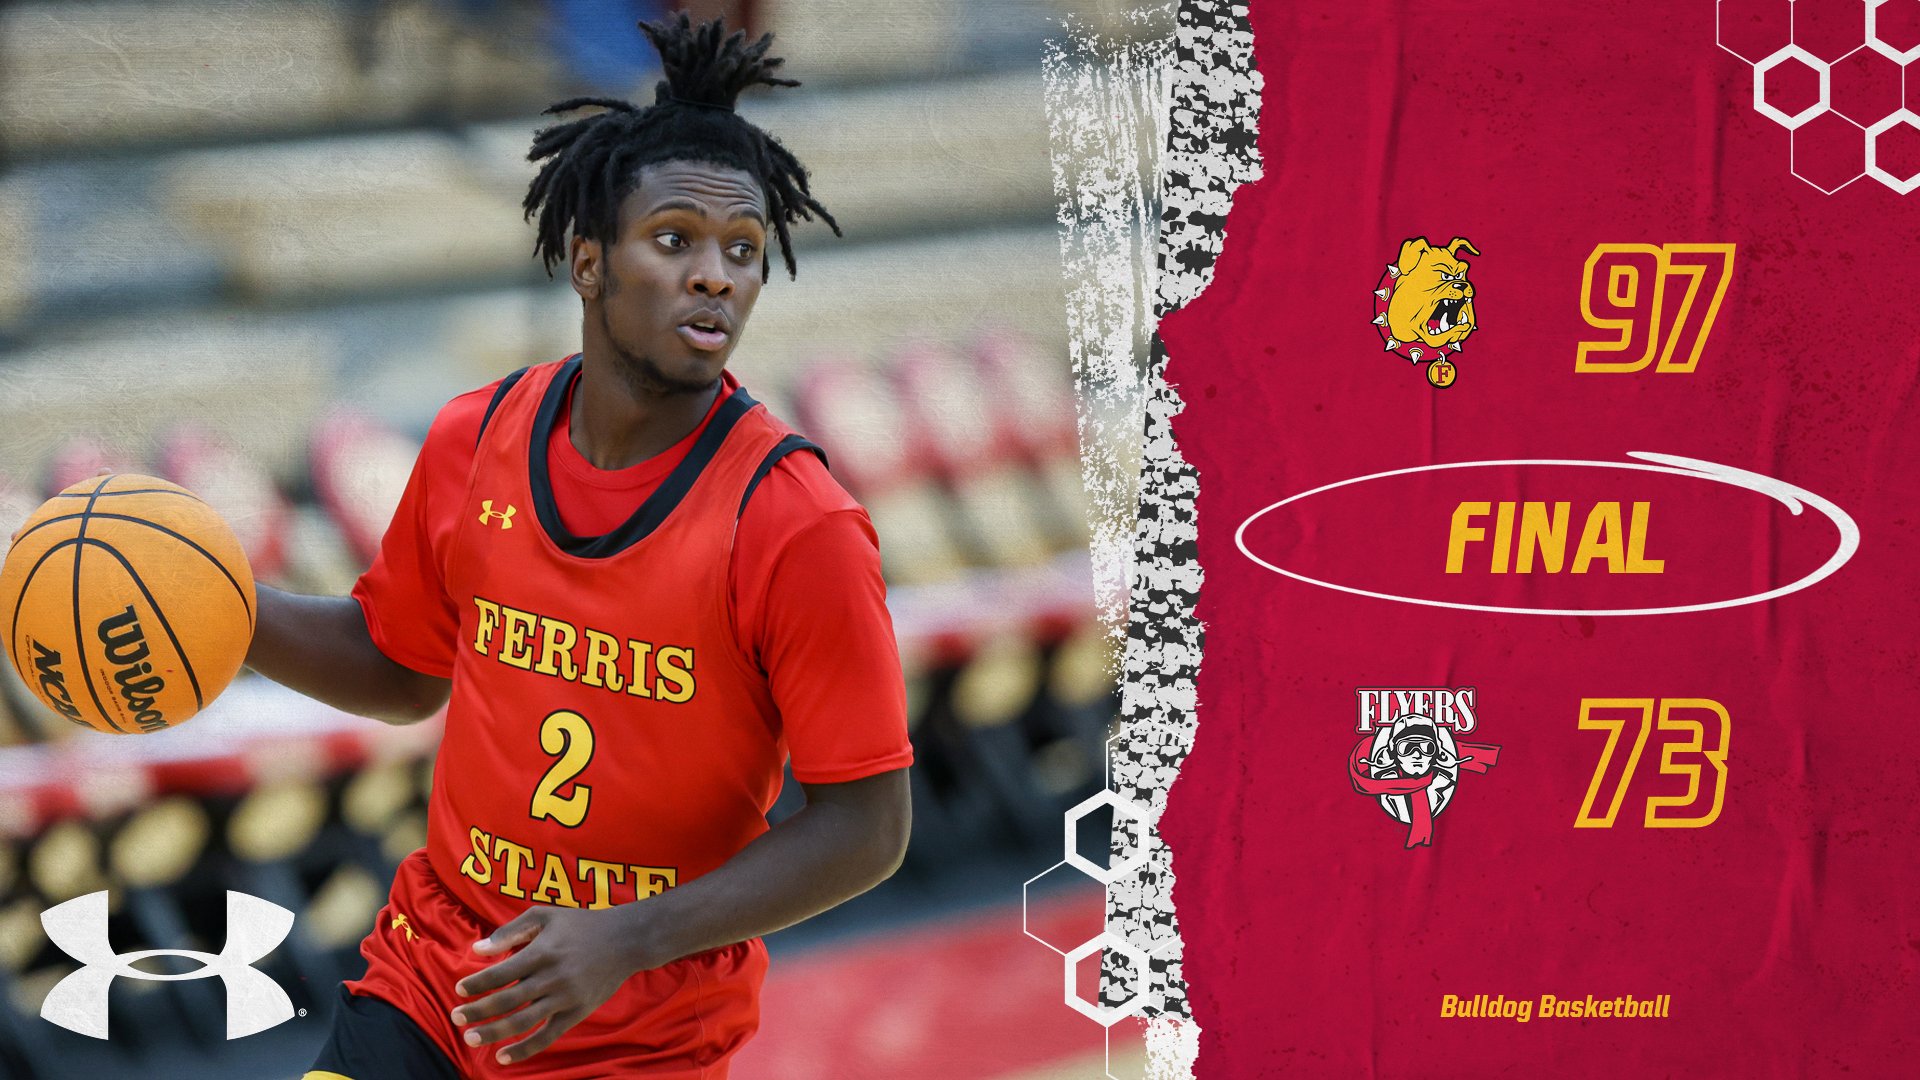 Huge Second-Half Lifts Ferris State To Regional Home Win Over Lewis